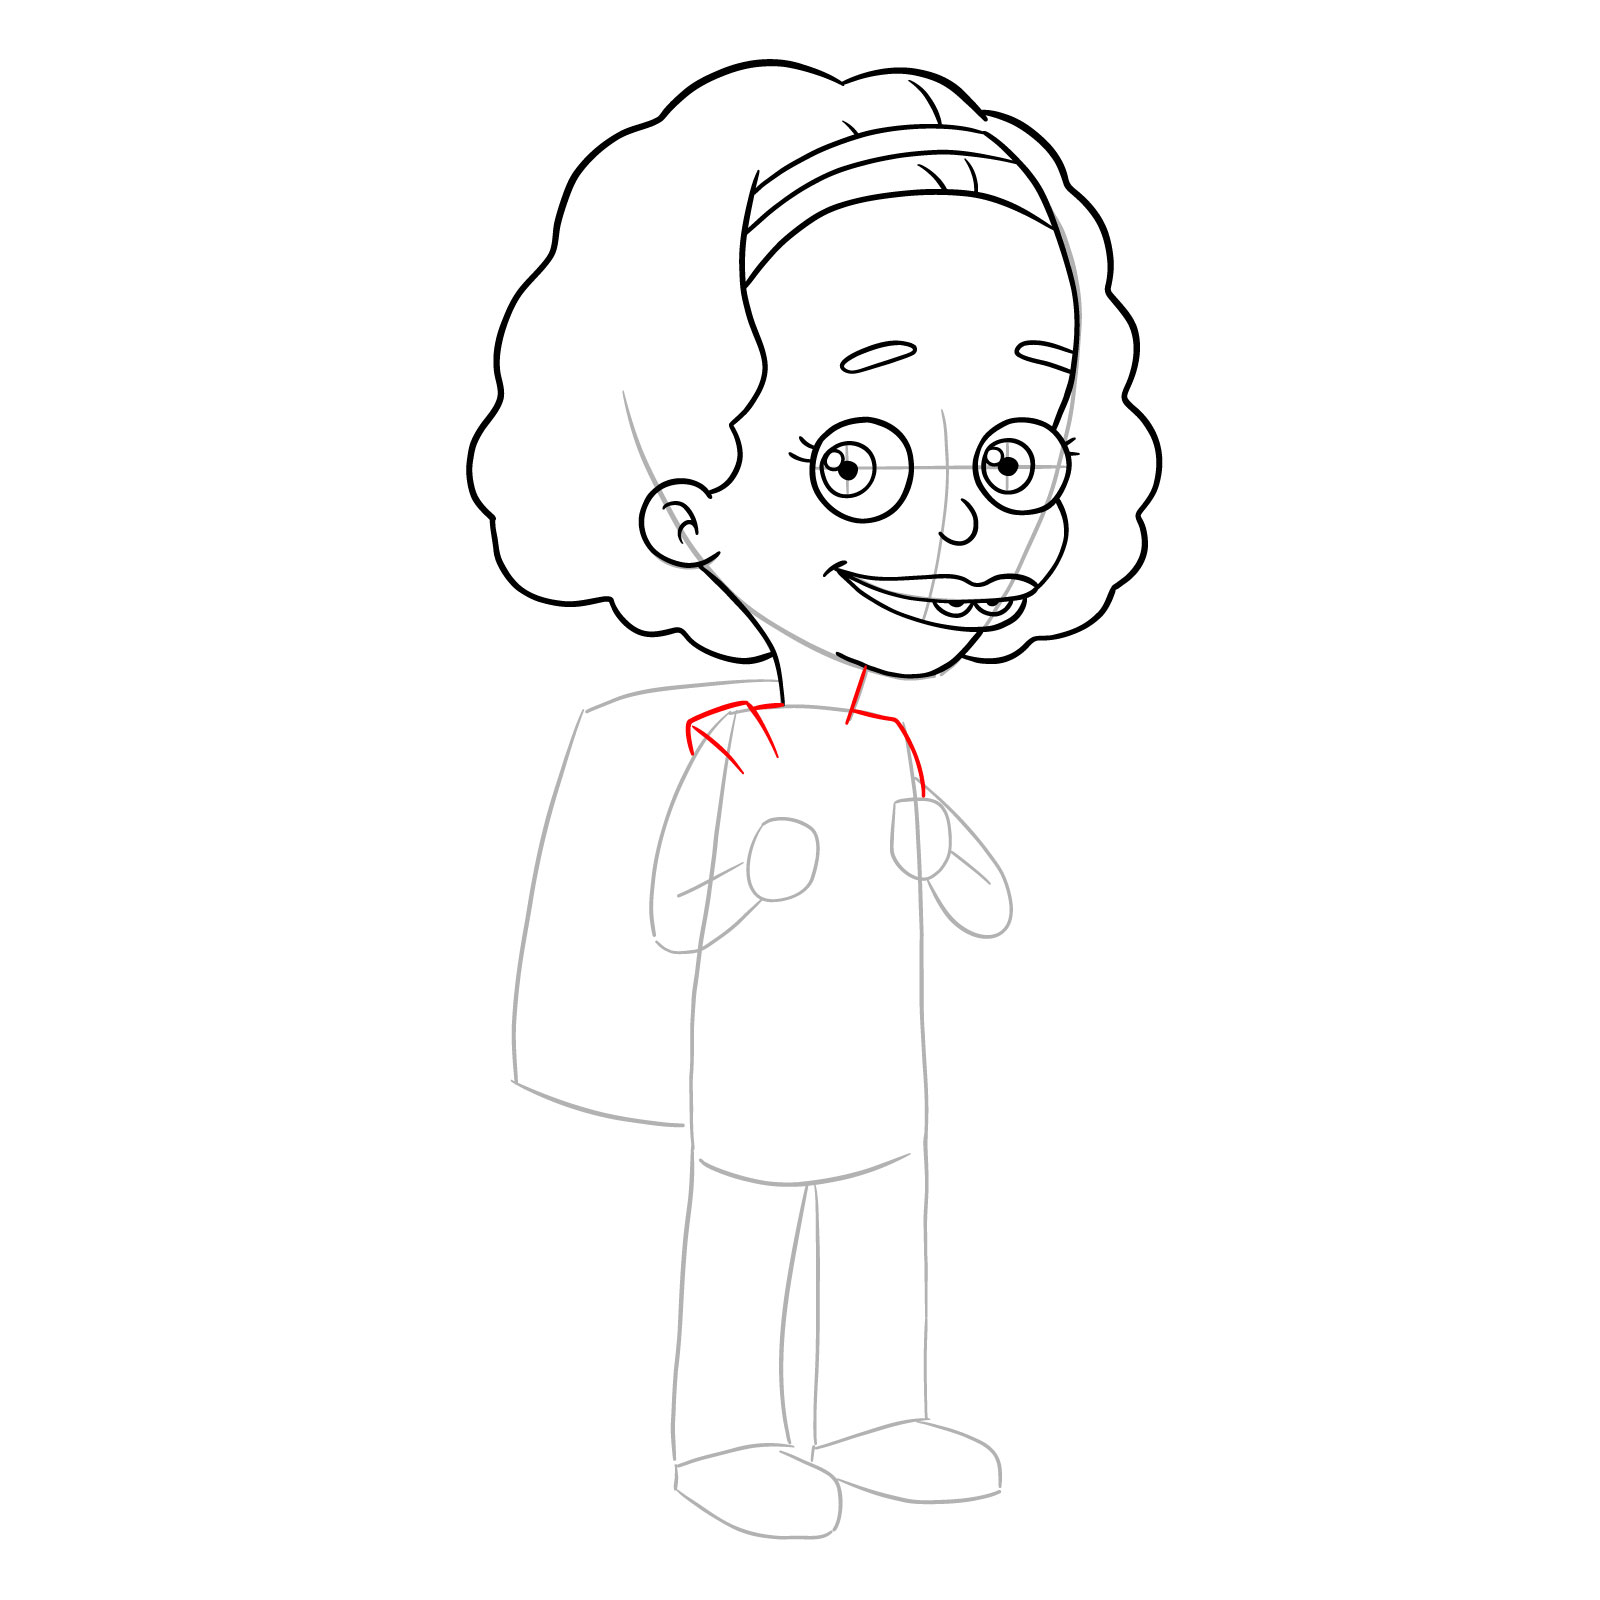 How to draw Missy from Big Mouth - step 13